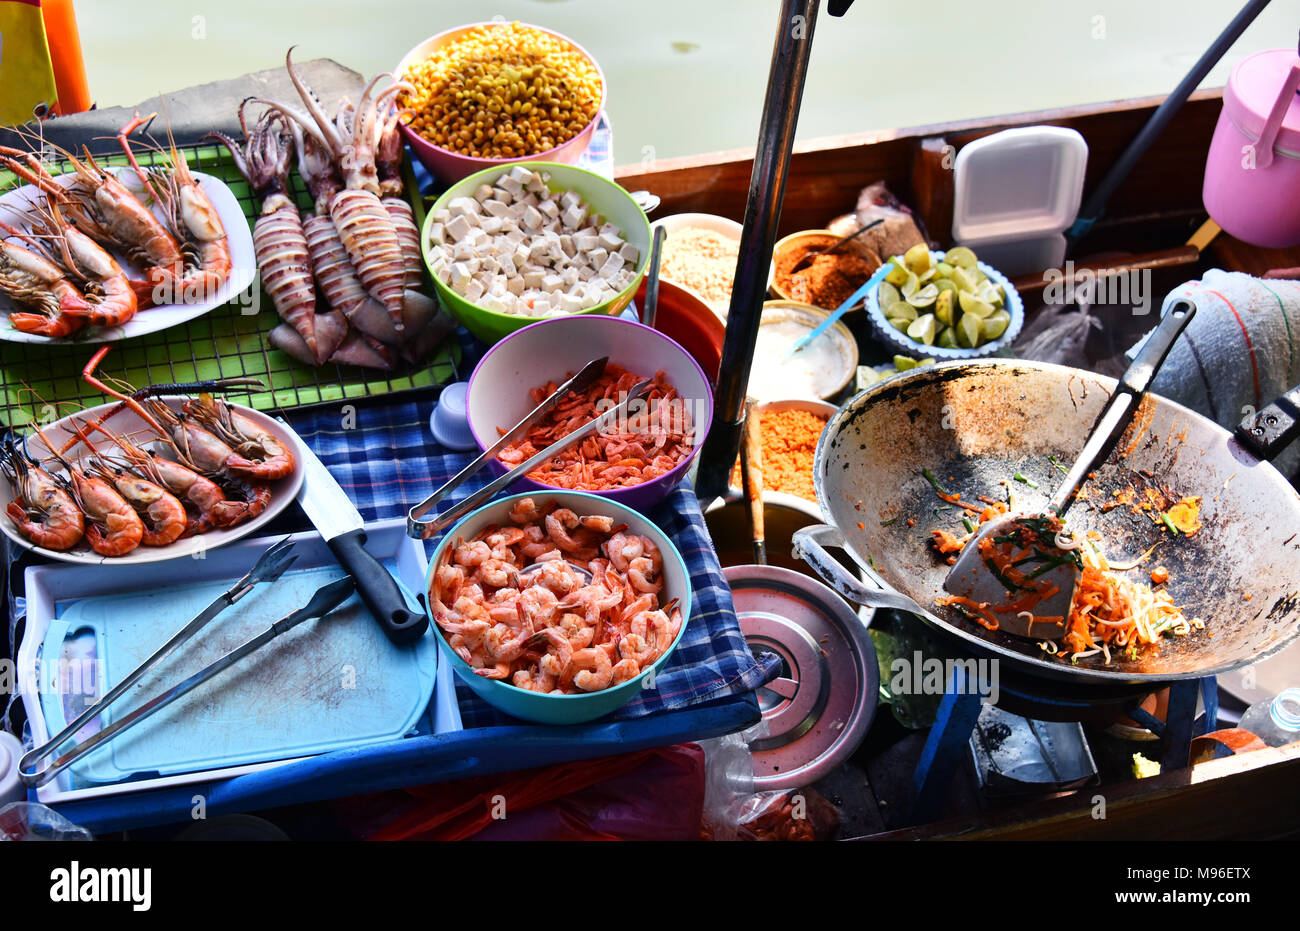 Preparing seafood in the street restaurant on boat in Thailand. Stock Photo